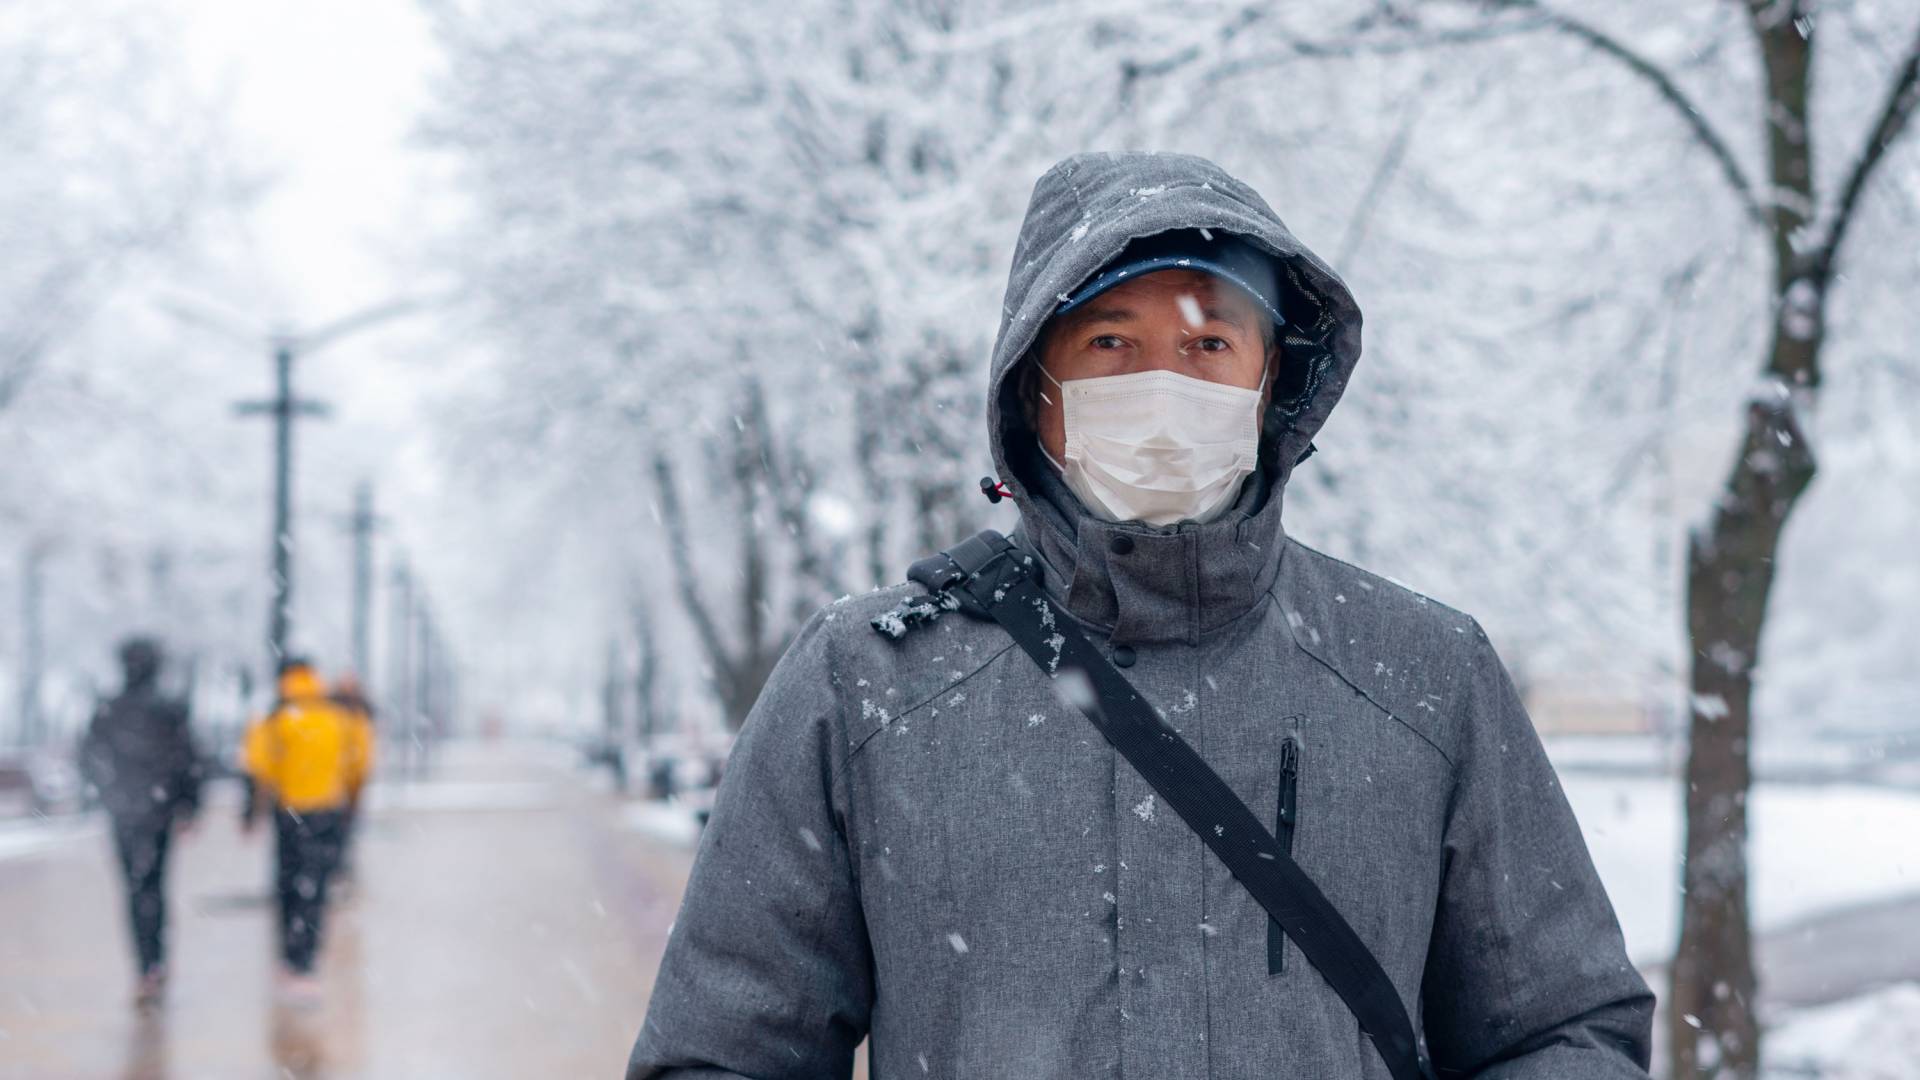 A masked person stands on a snowy walking path